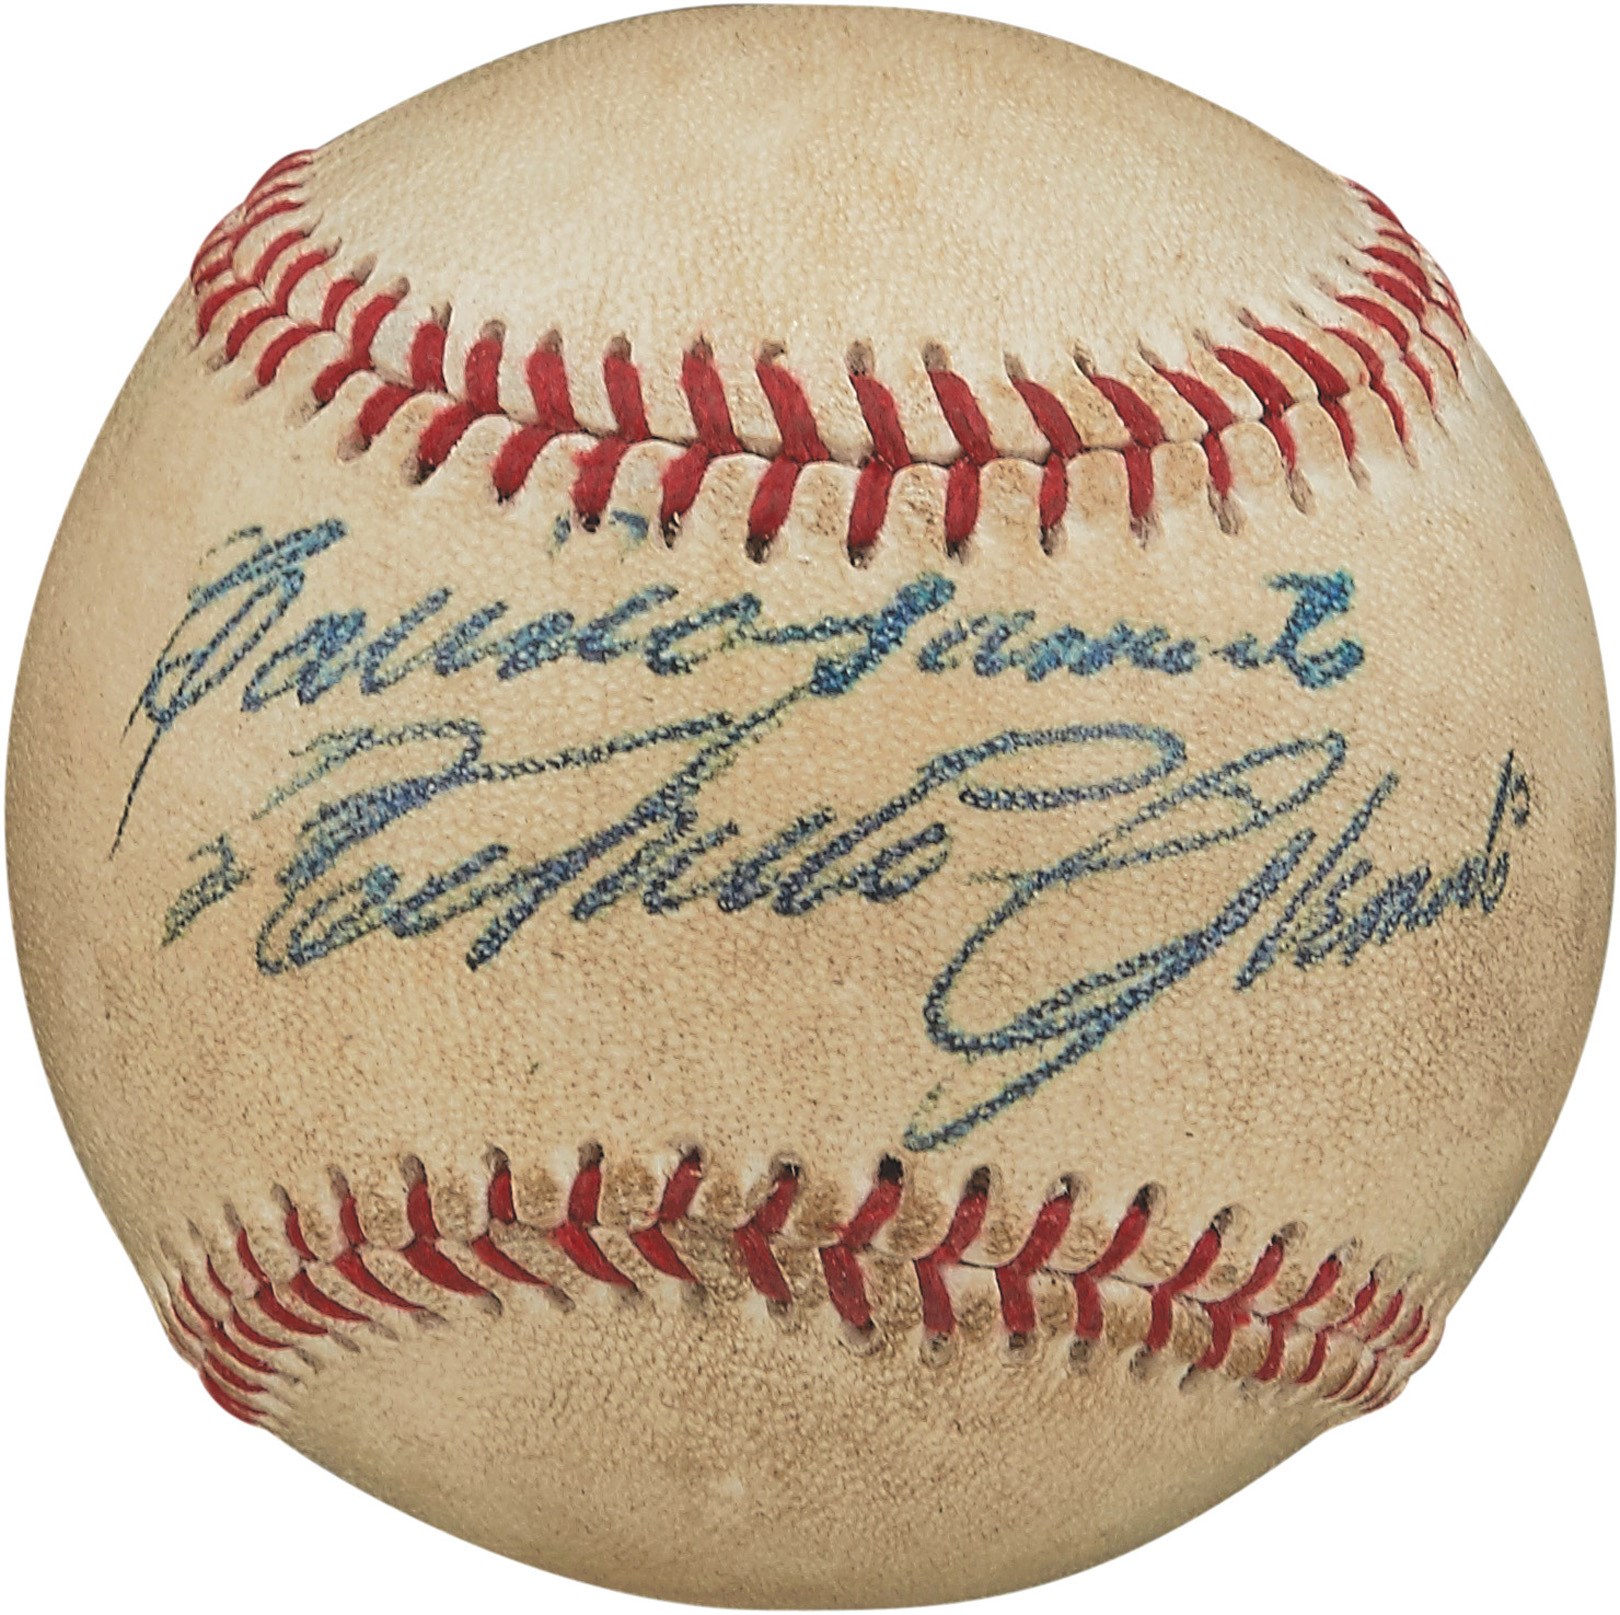 Clemente and Pittsburgh Pirates - Exquisite Roberto Clemente Single-Signed Baseball (PSA)